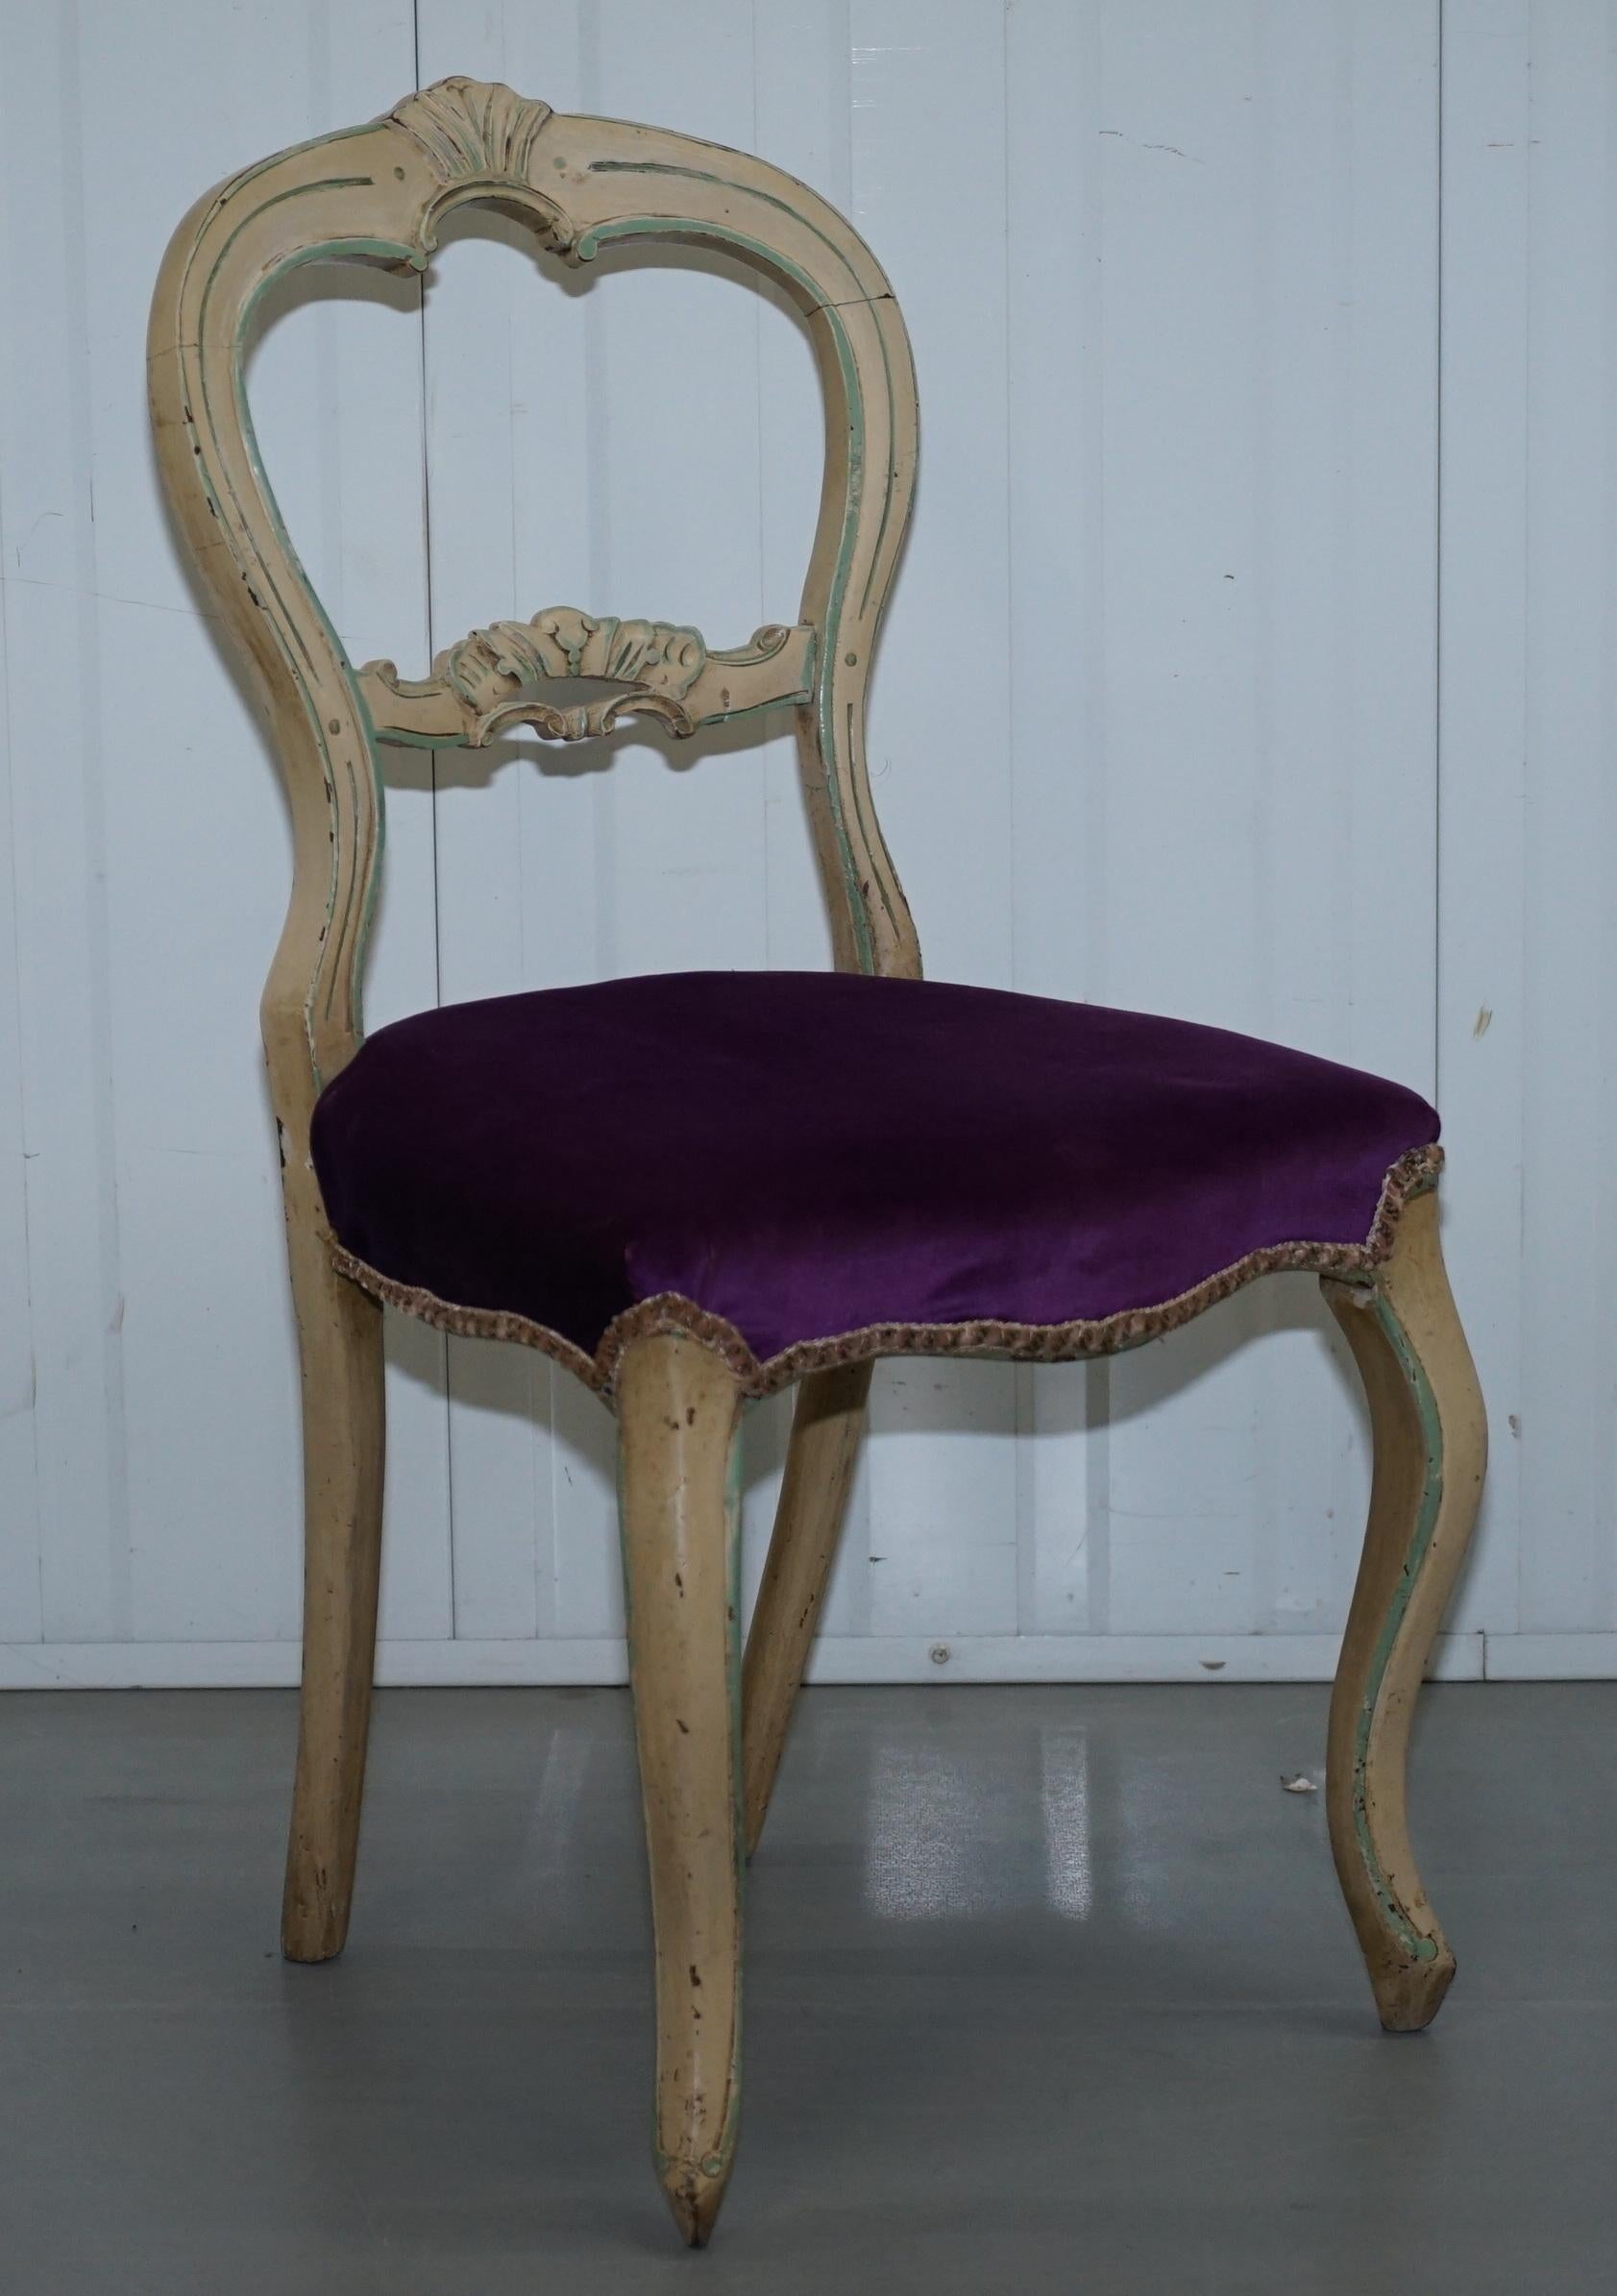 We are delighted to offer for sale this nice set of five original Victorian Medallion back dining chairs handmade in France with period shabby chic paint

A very decorative and traditional set of dining chairs, nice to find a set of five, ideal